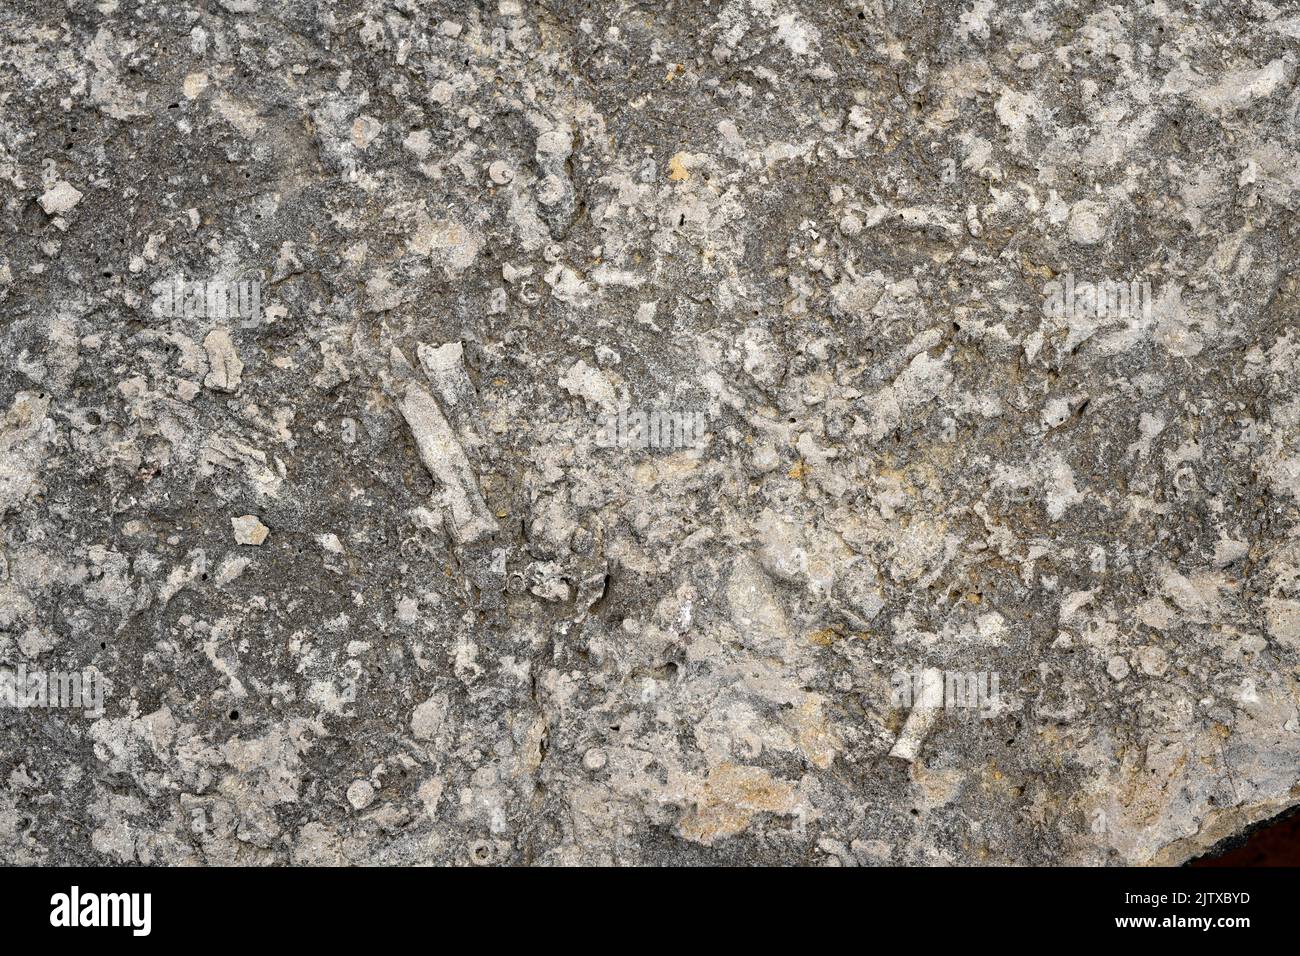 Various marine fossils in Cabo Carvoeiro, Peniche, Portugal. Stock Photo